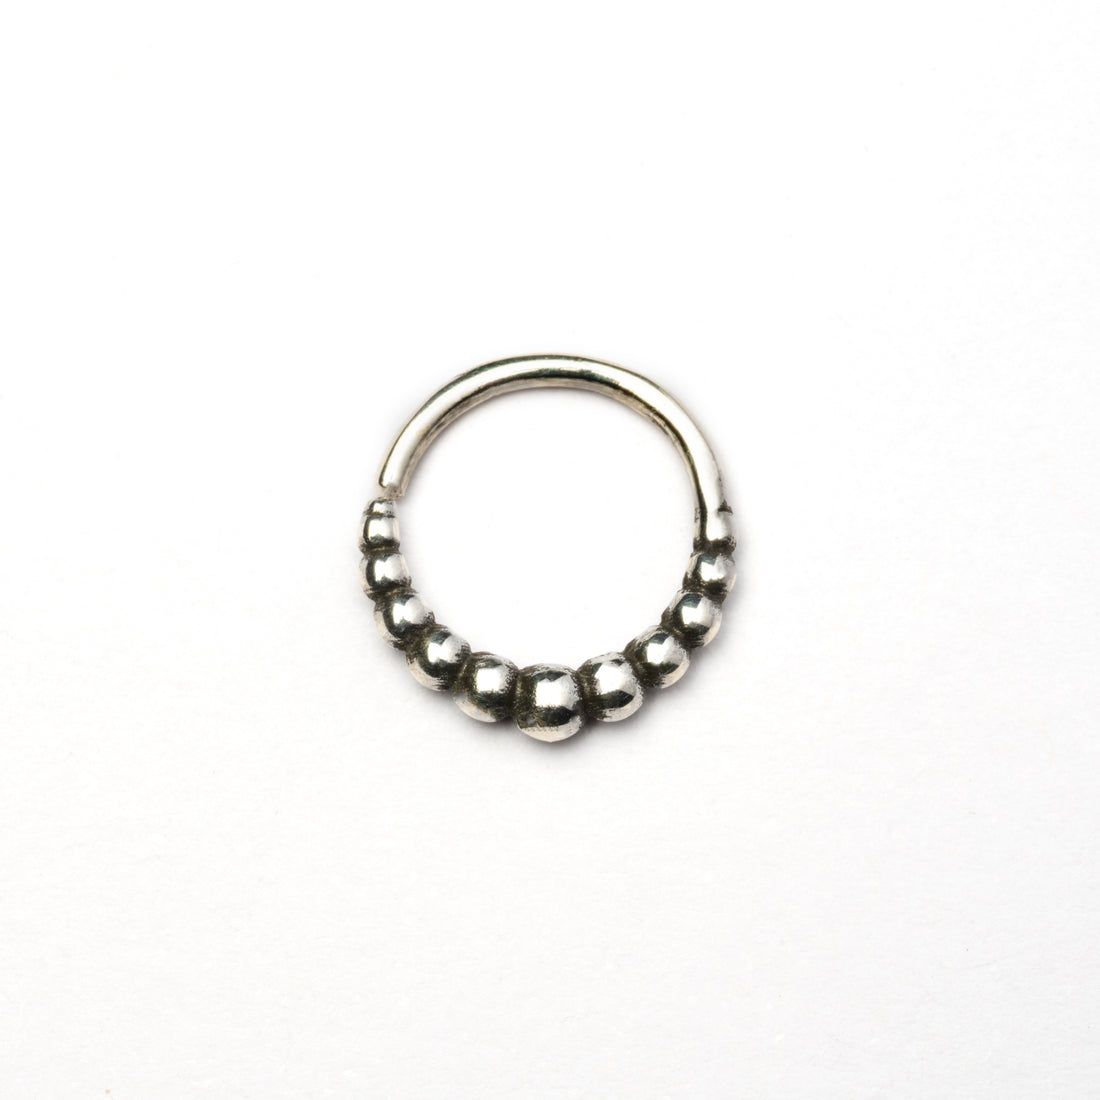 Sterling Silver Septum Ring frontal view